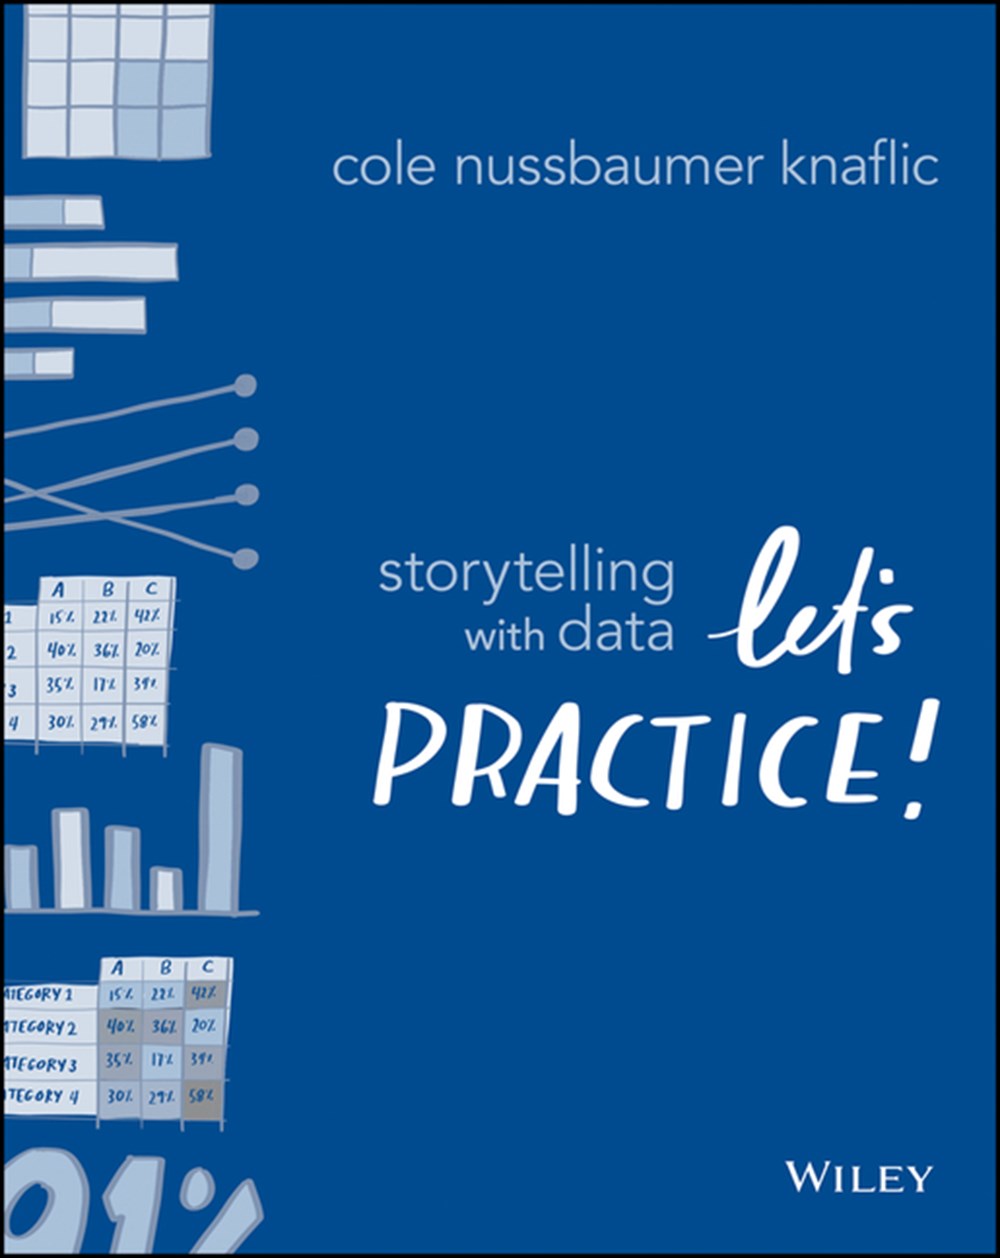 Storytelling with Data: Let's Practice! by Cole Nussbaumer Knaflic